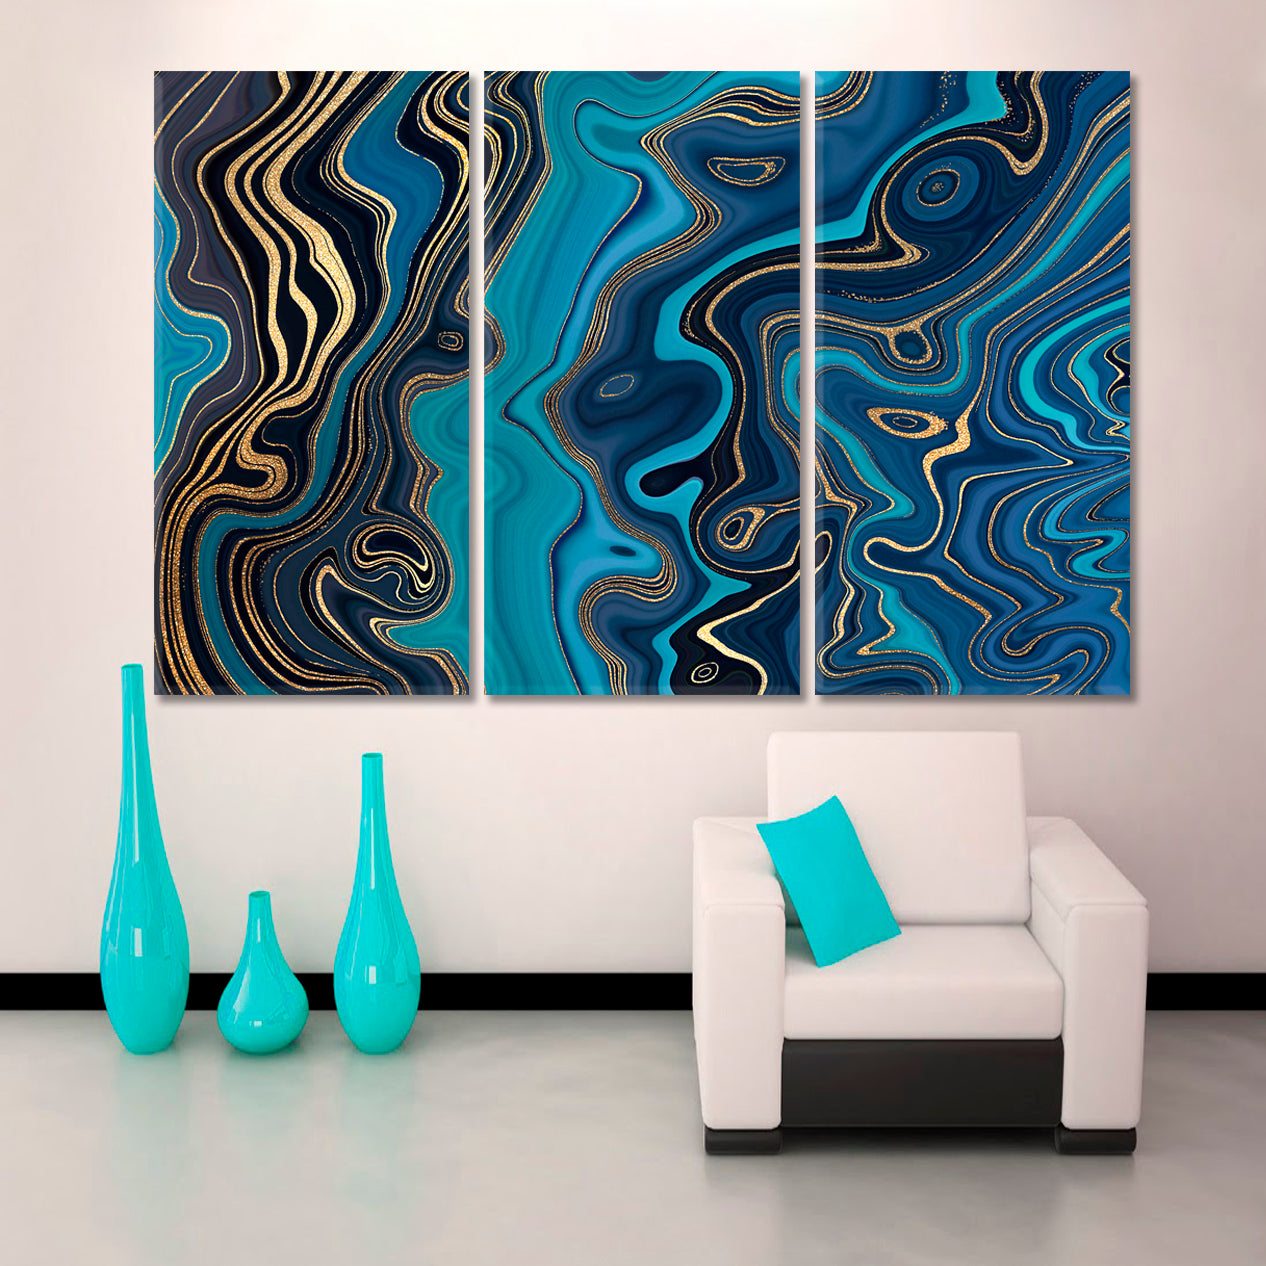 MARBLE EFFECT series Turquoise Navy Blue & Gold Abstract Swirl Artistic Design Giclée Print Fluid Art, Oriental Marbling Canvas Print Artesty 3 panels 36" x 24" 